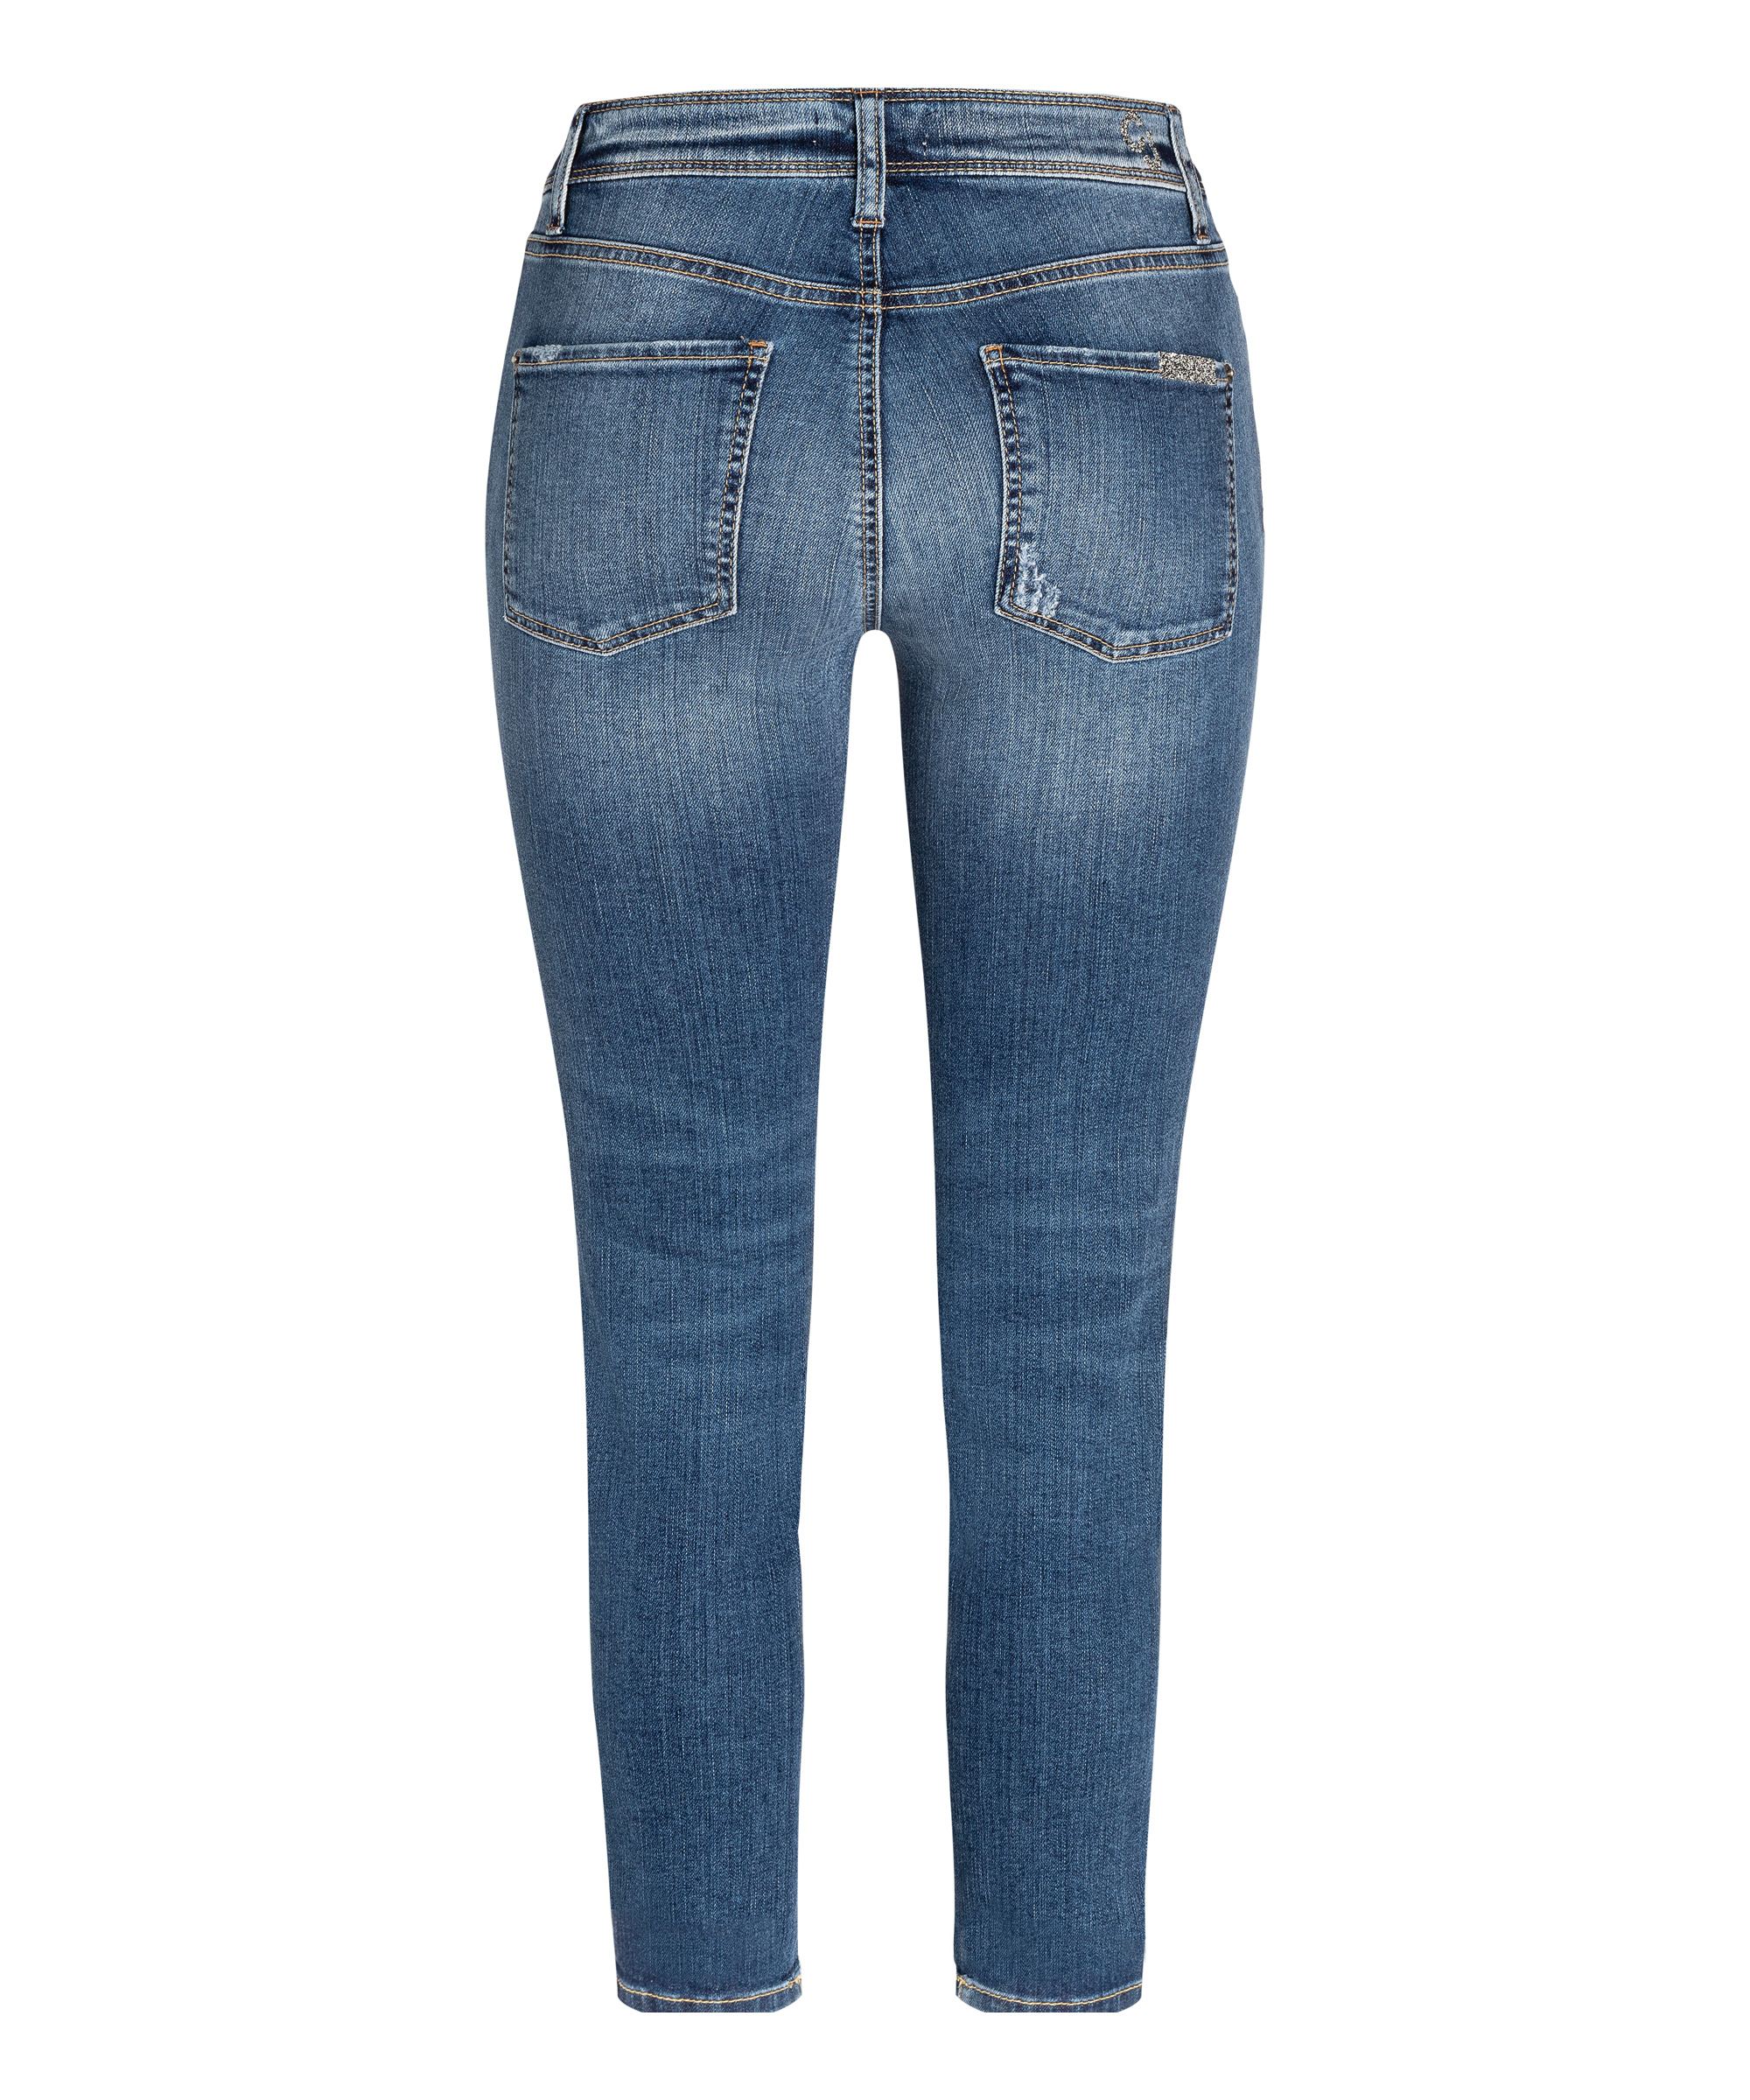 Beeldhouwer innovatie consumptie Cambio jeans Piper short BLEACHED SCRATCHED WASH